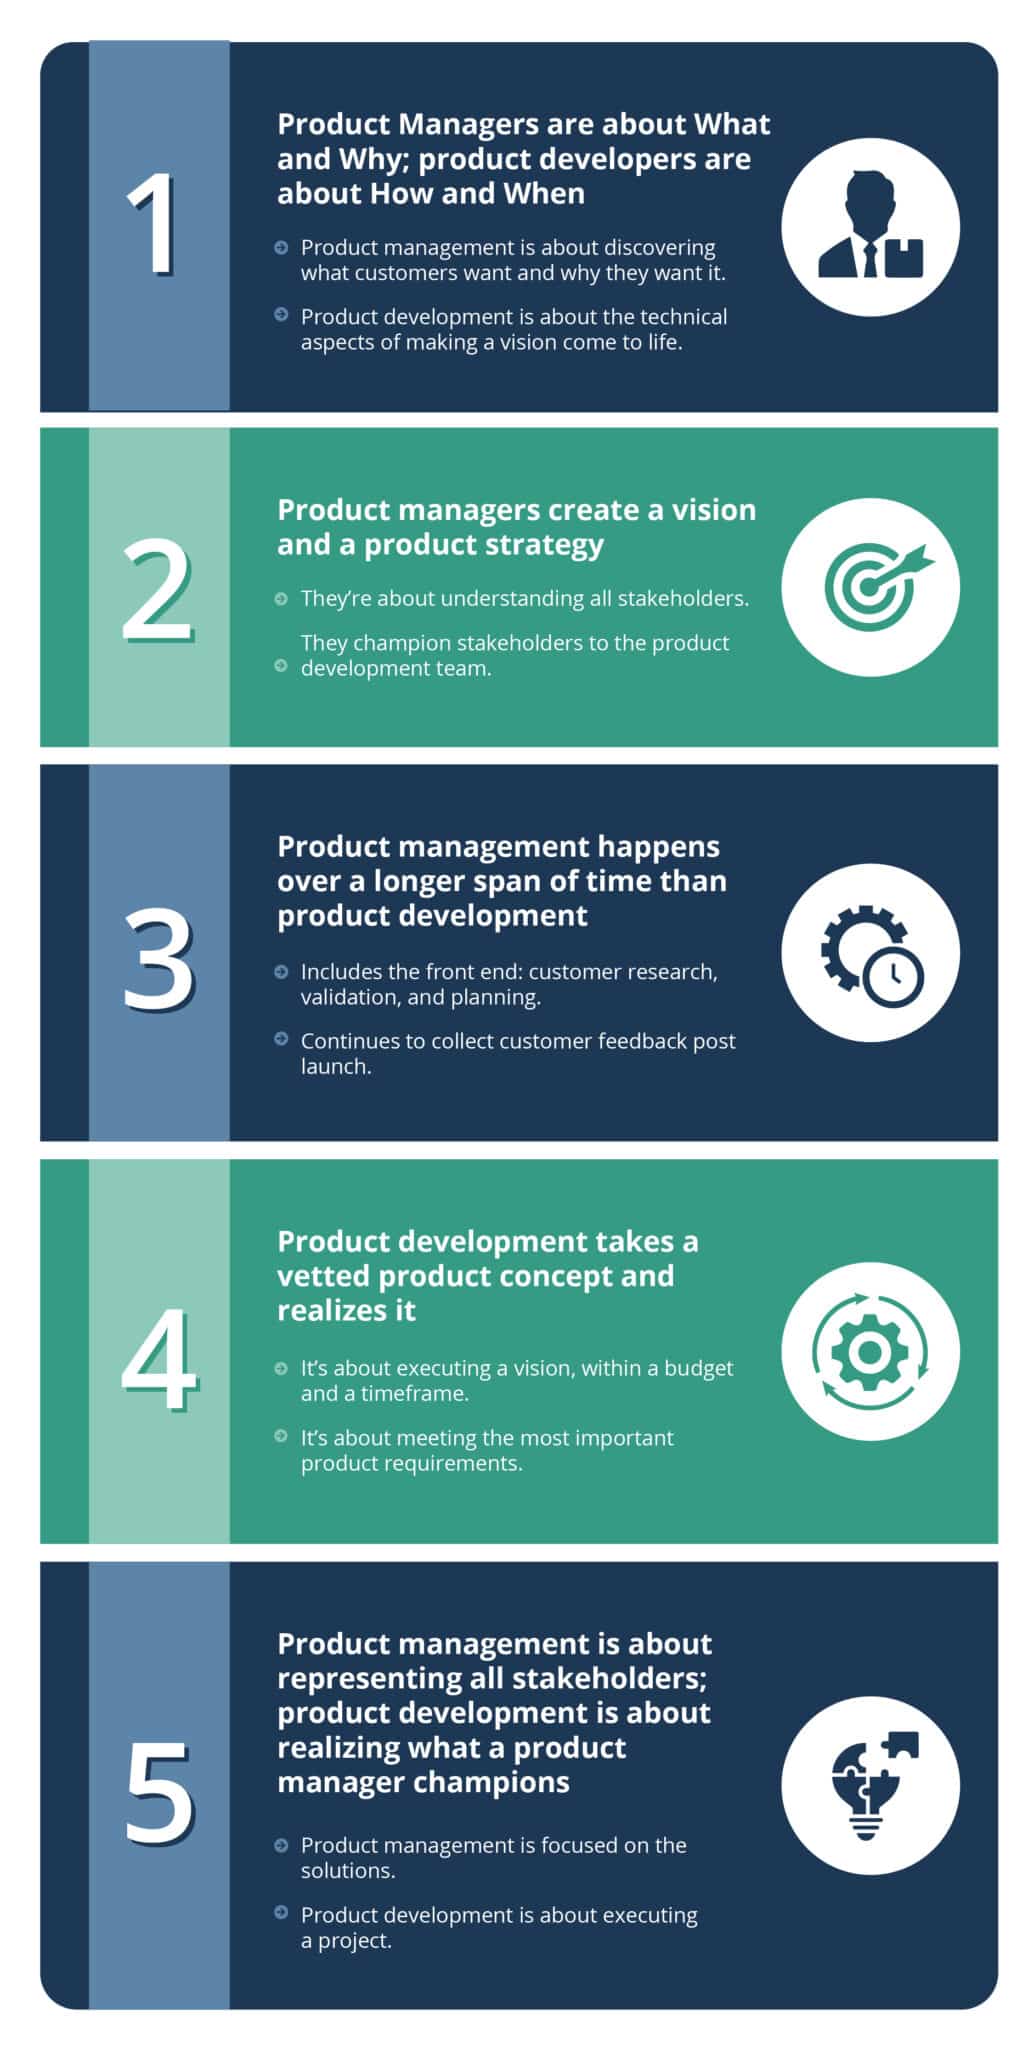 What is the difference between product management and product development?